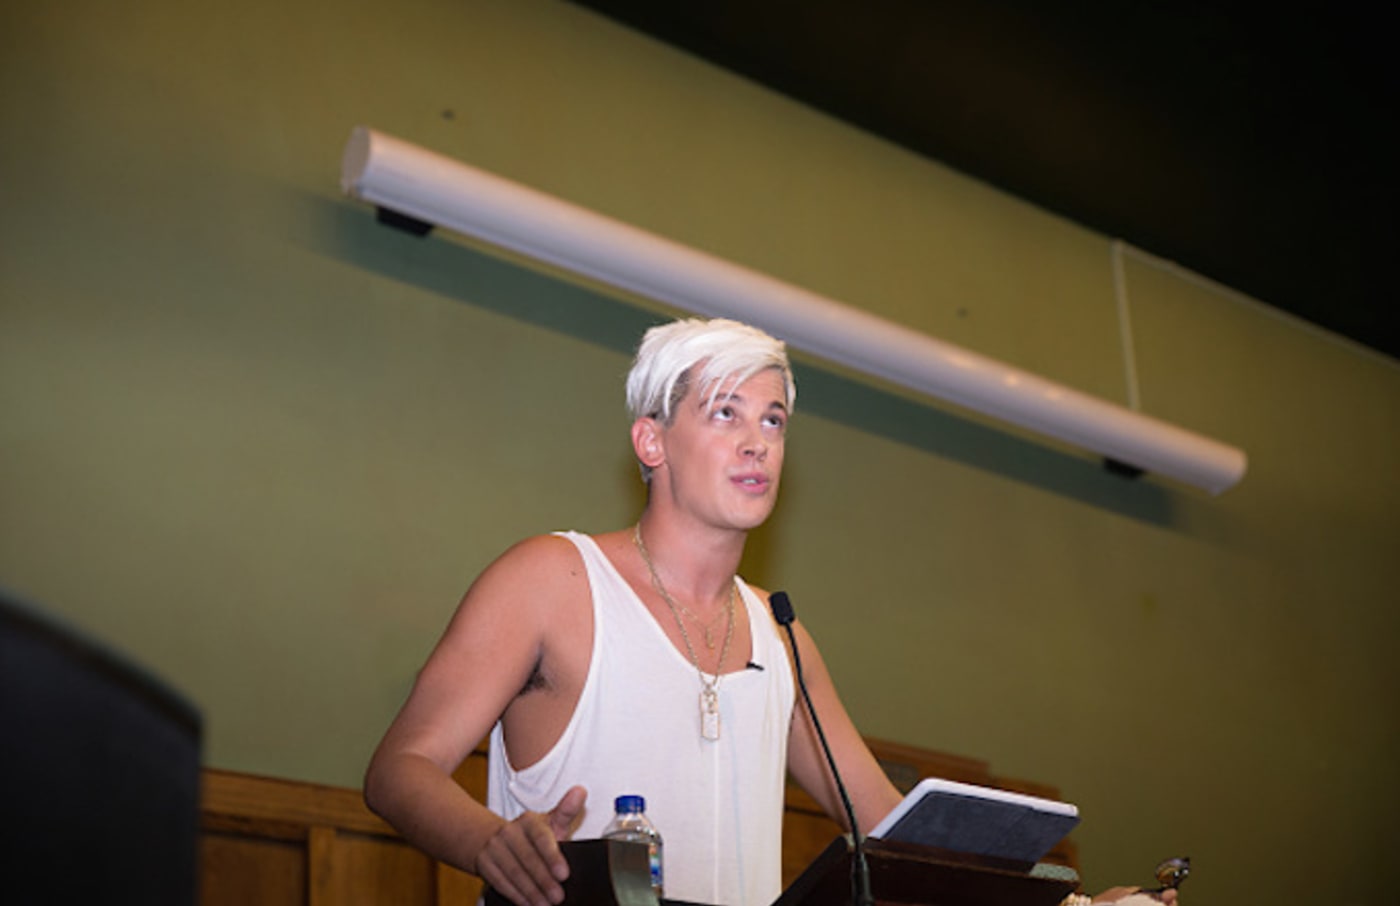 Milo Yiannopoulos speaks at the Young British Heritage Society launch event